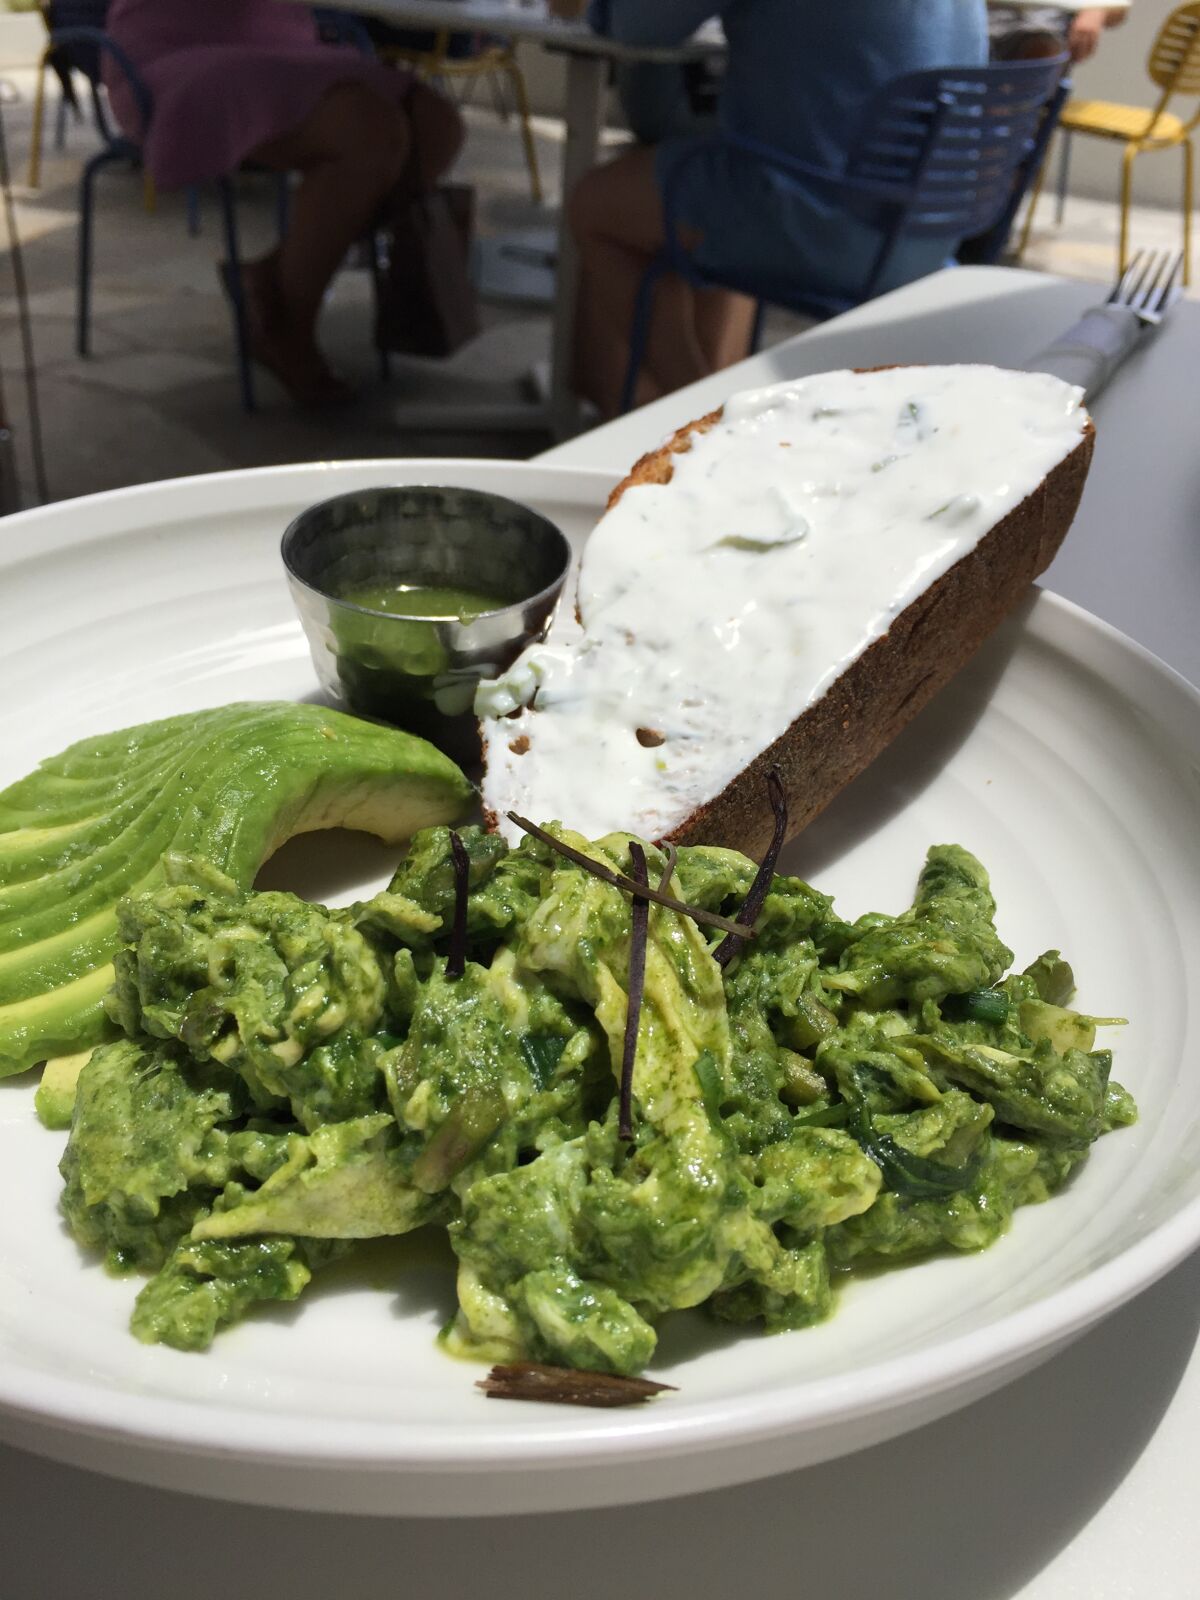 Organic green scrambled eggs at Parakeet Cafe. The dish includes kale, asparagus, green beans, avocado and salsa verde with a side of toast with labneh spread.